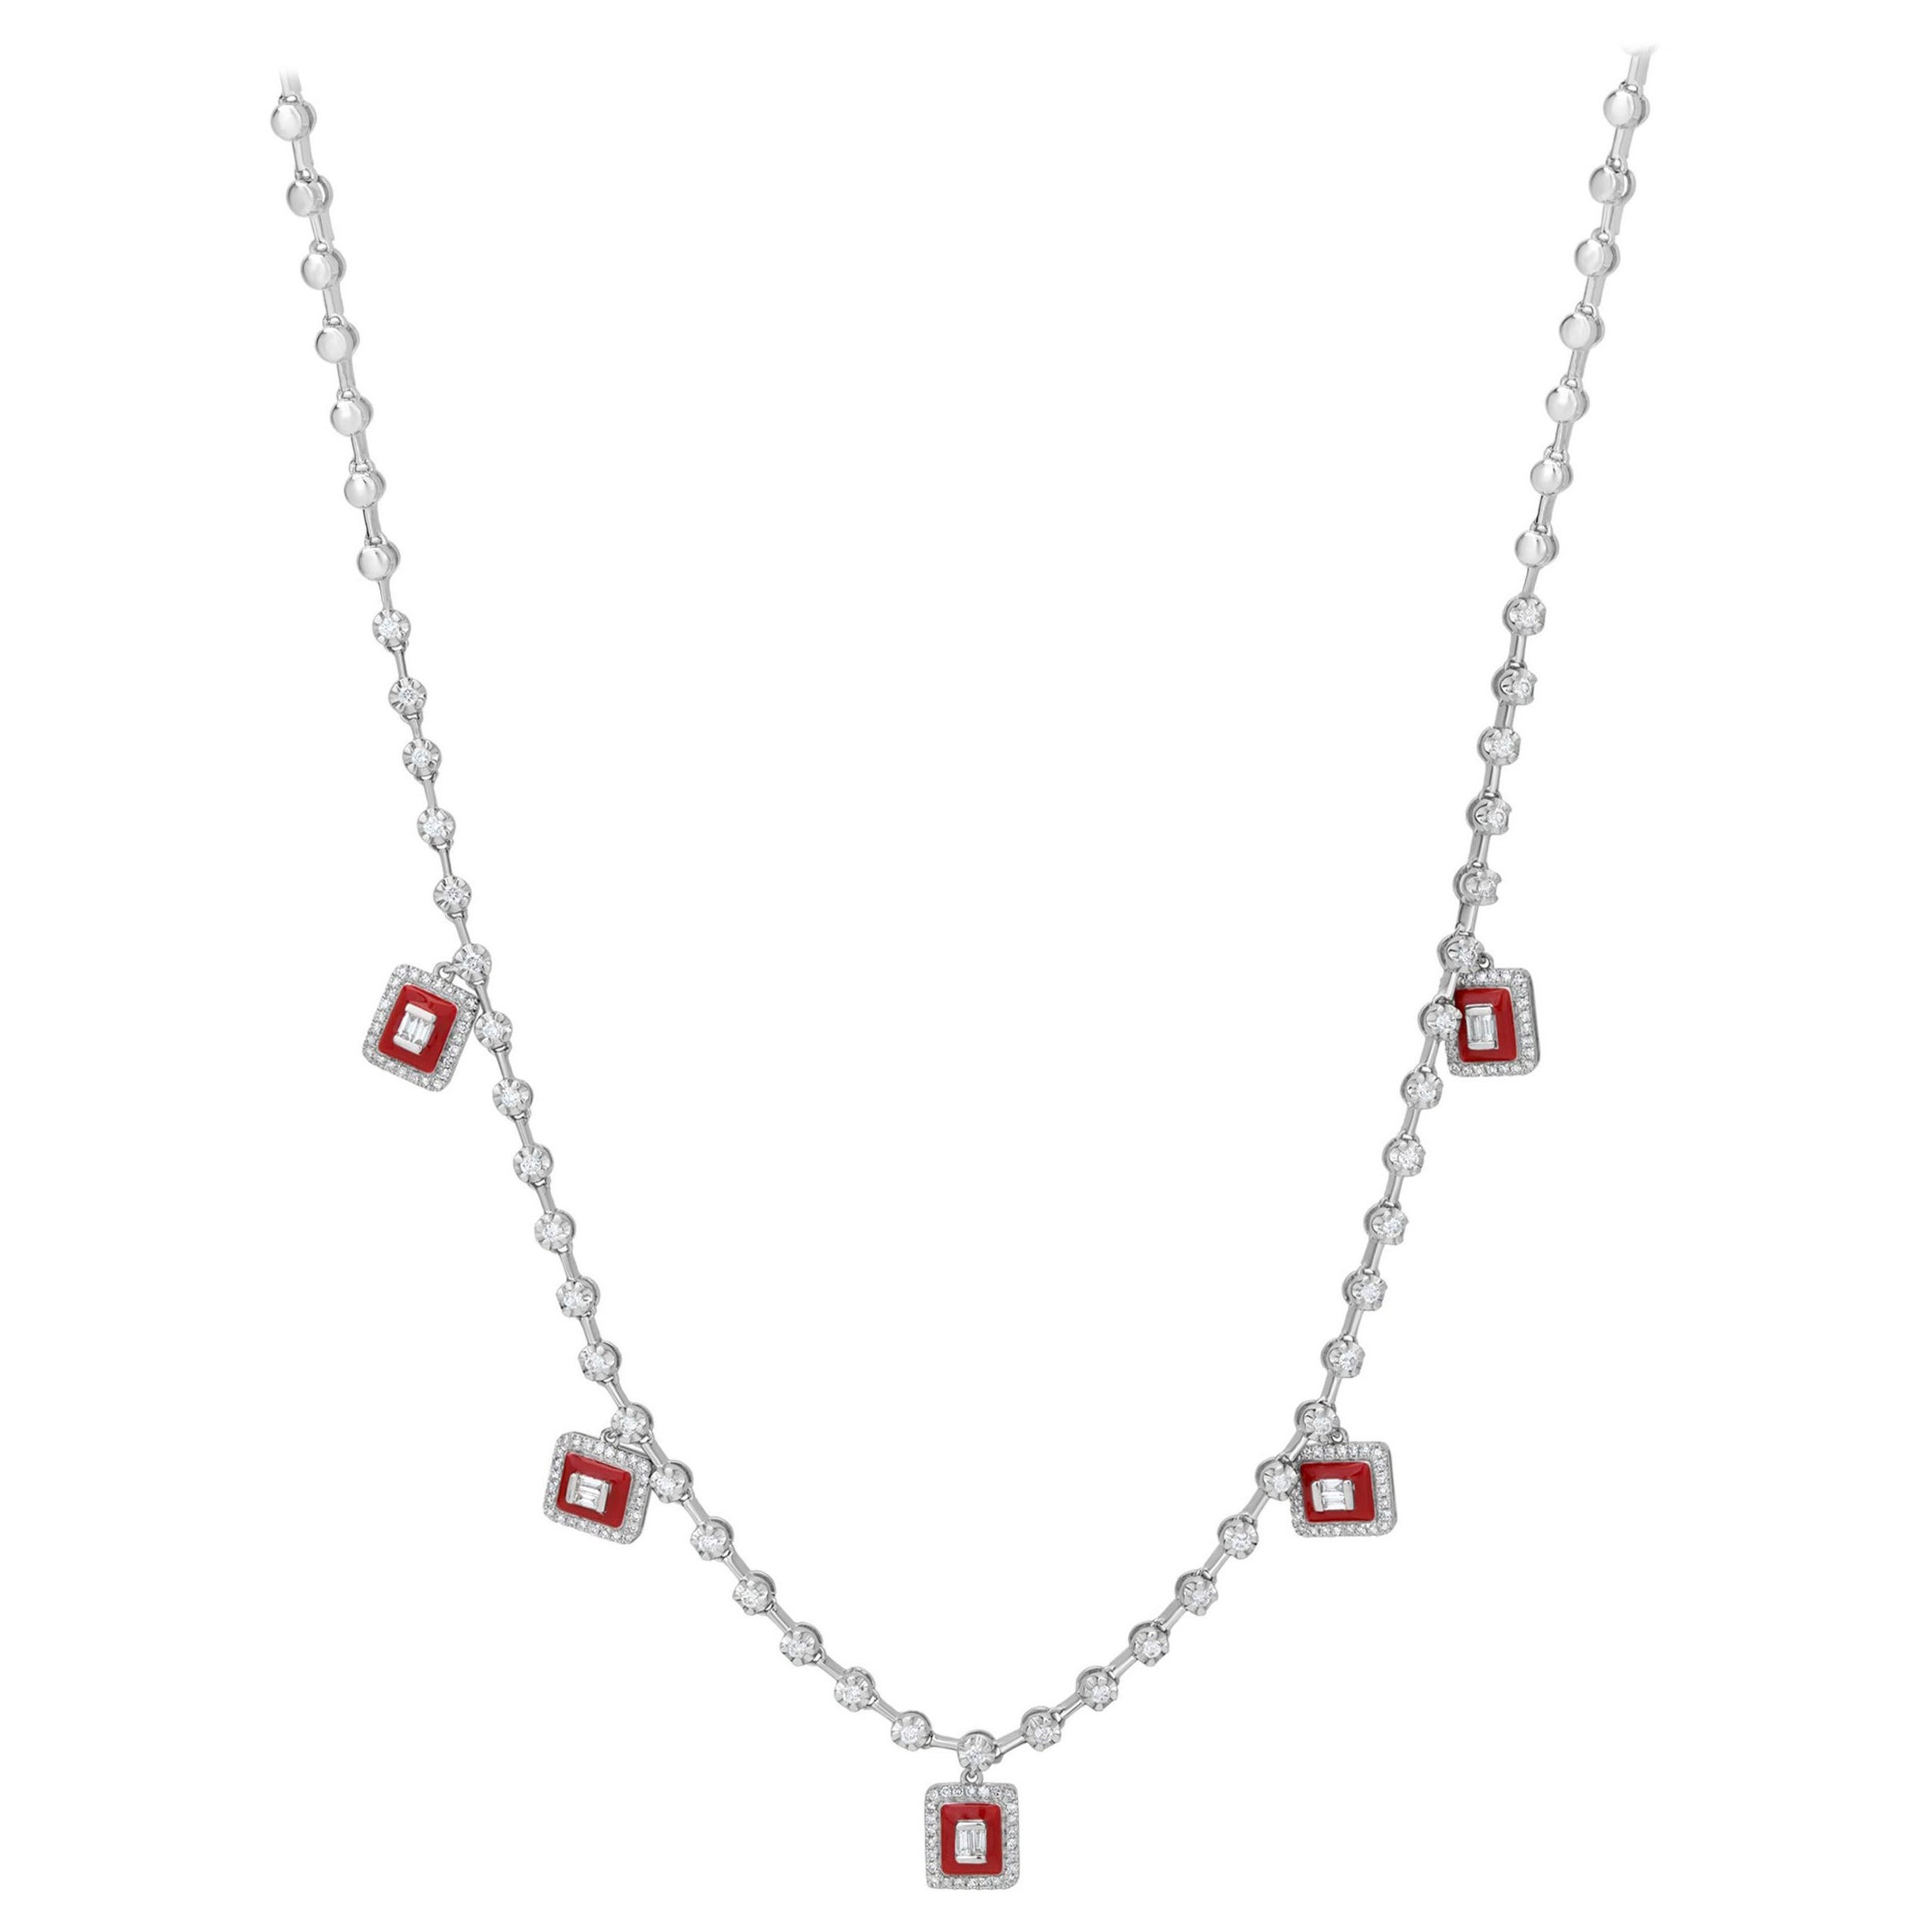 Luxle 1ct T.W. Diamond Framed Charm Necklace in 18k White Gold